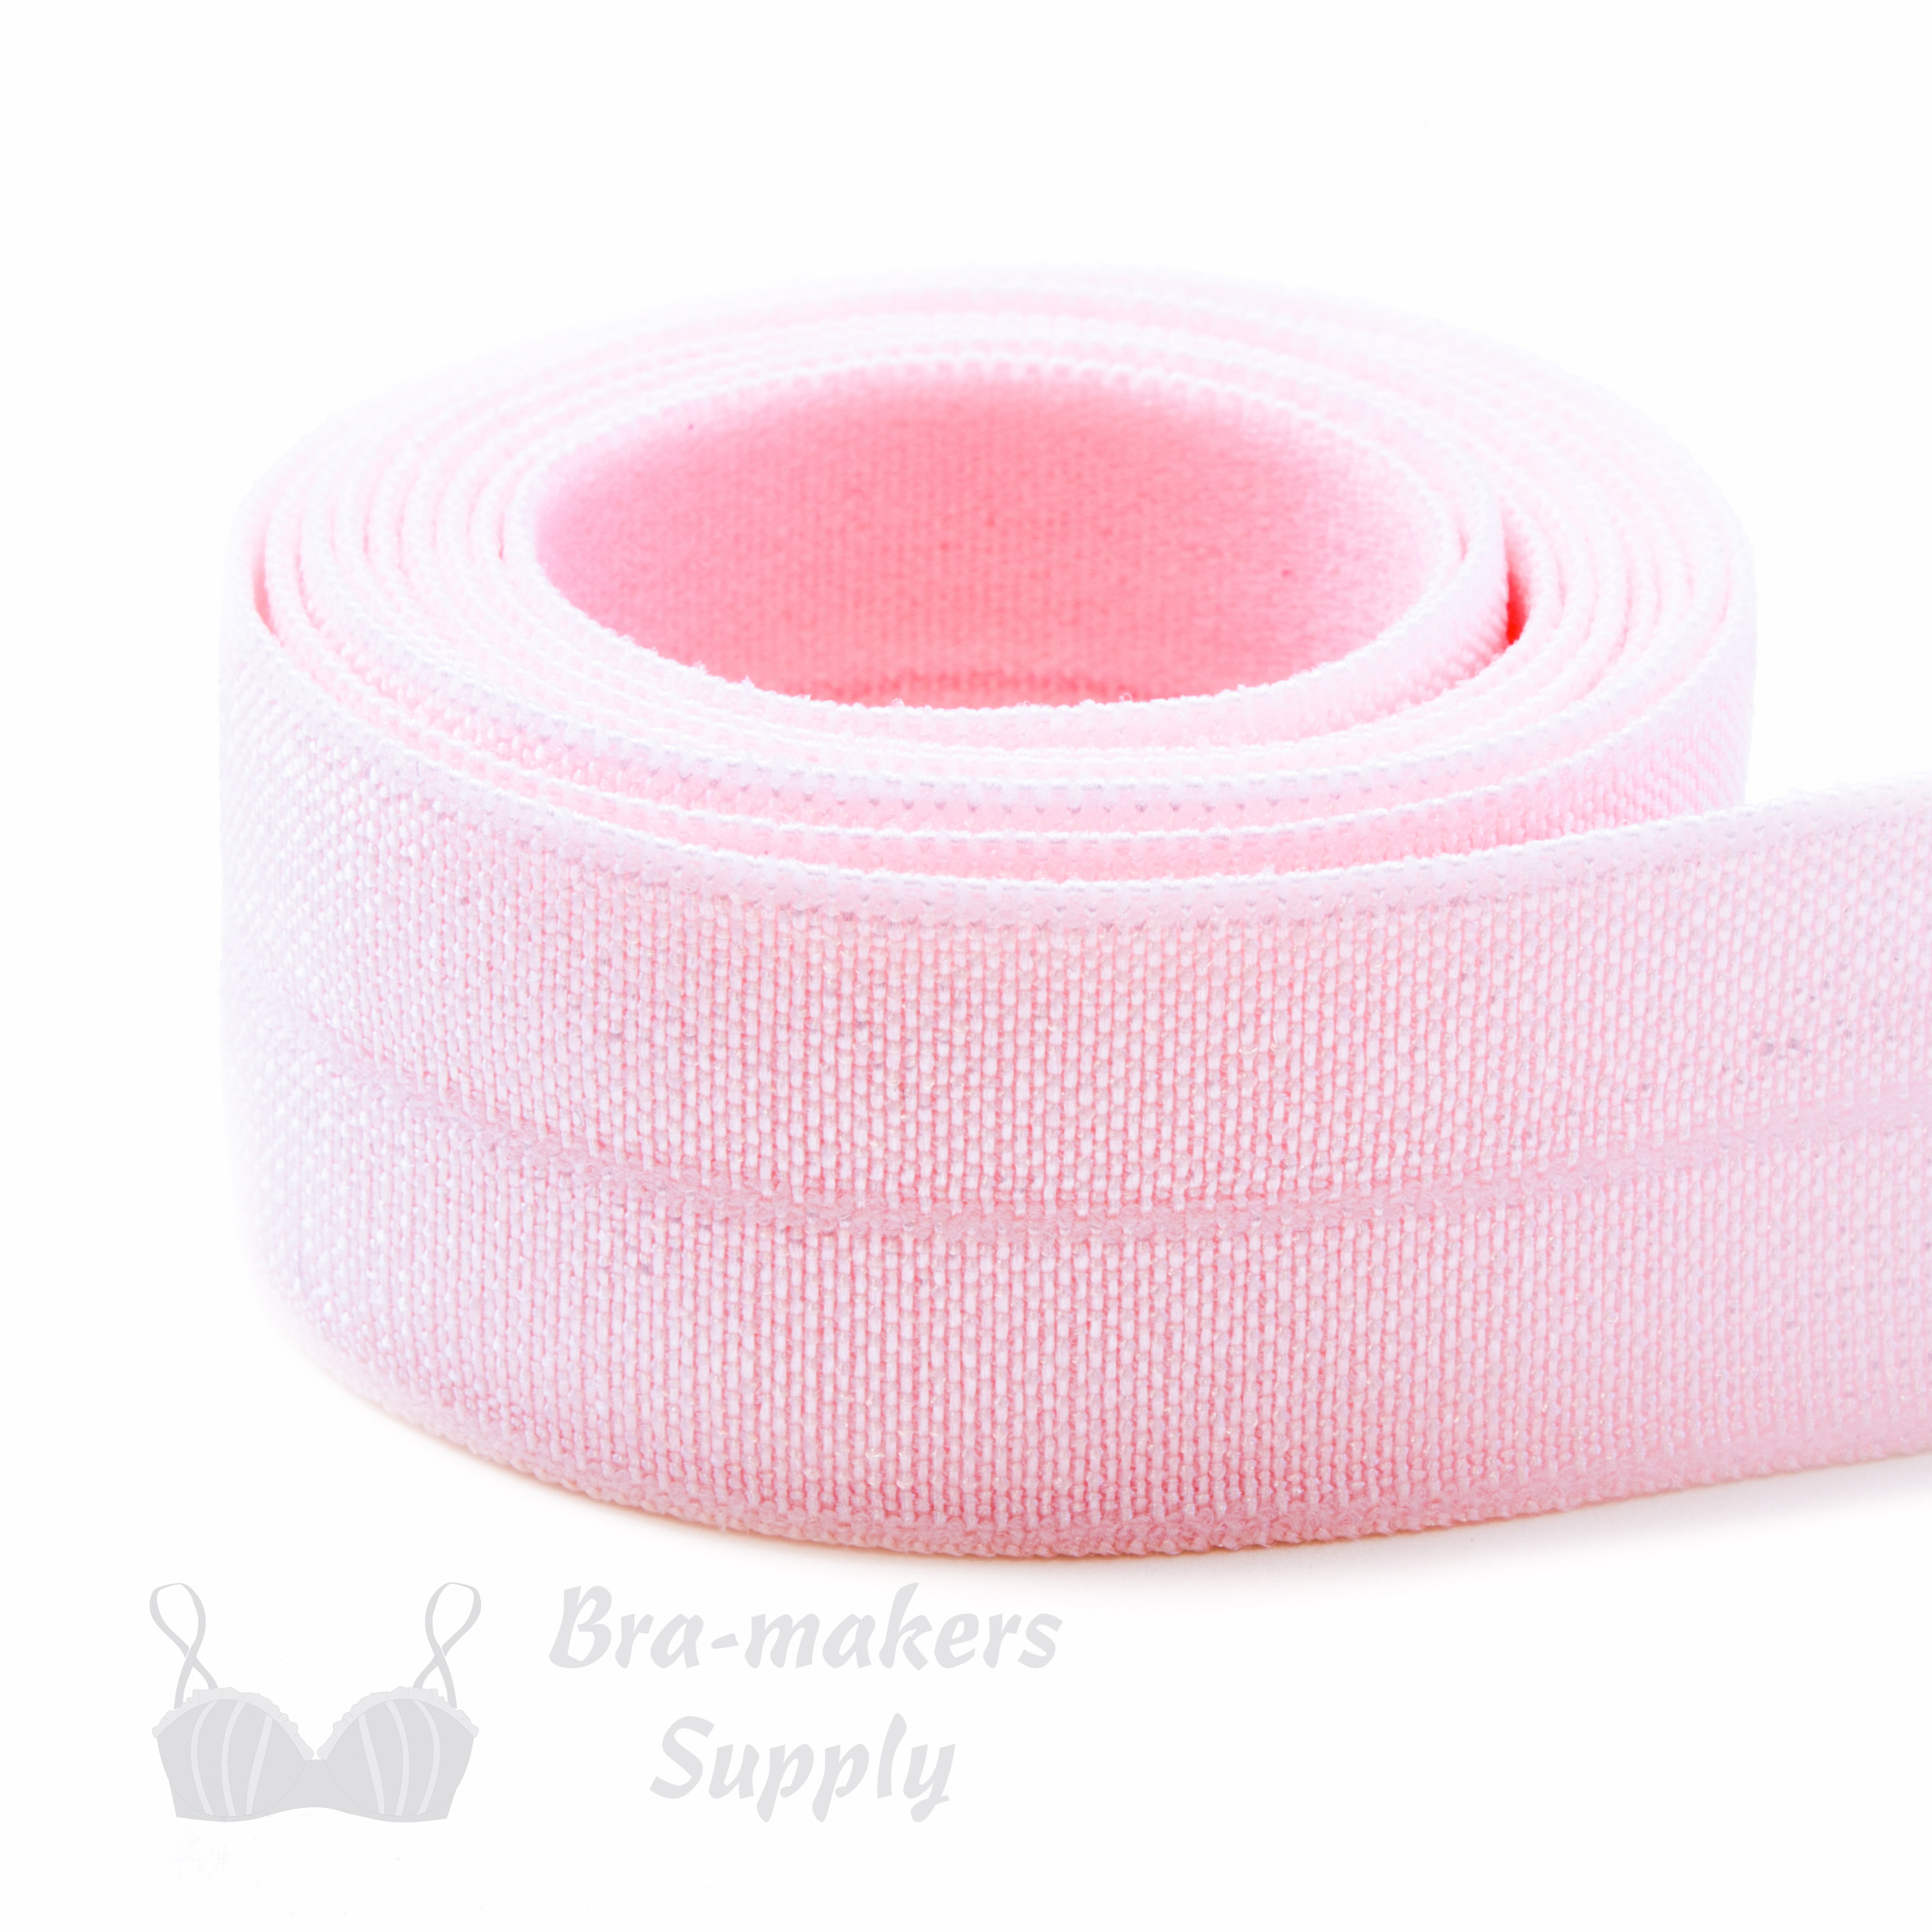 reversible fold-over elastic binding EF-5 pink or Pantone 12-1764 Pink Dogwood from Bra-Makers Supply 1 metre roll shown